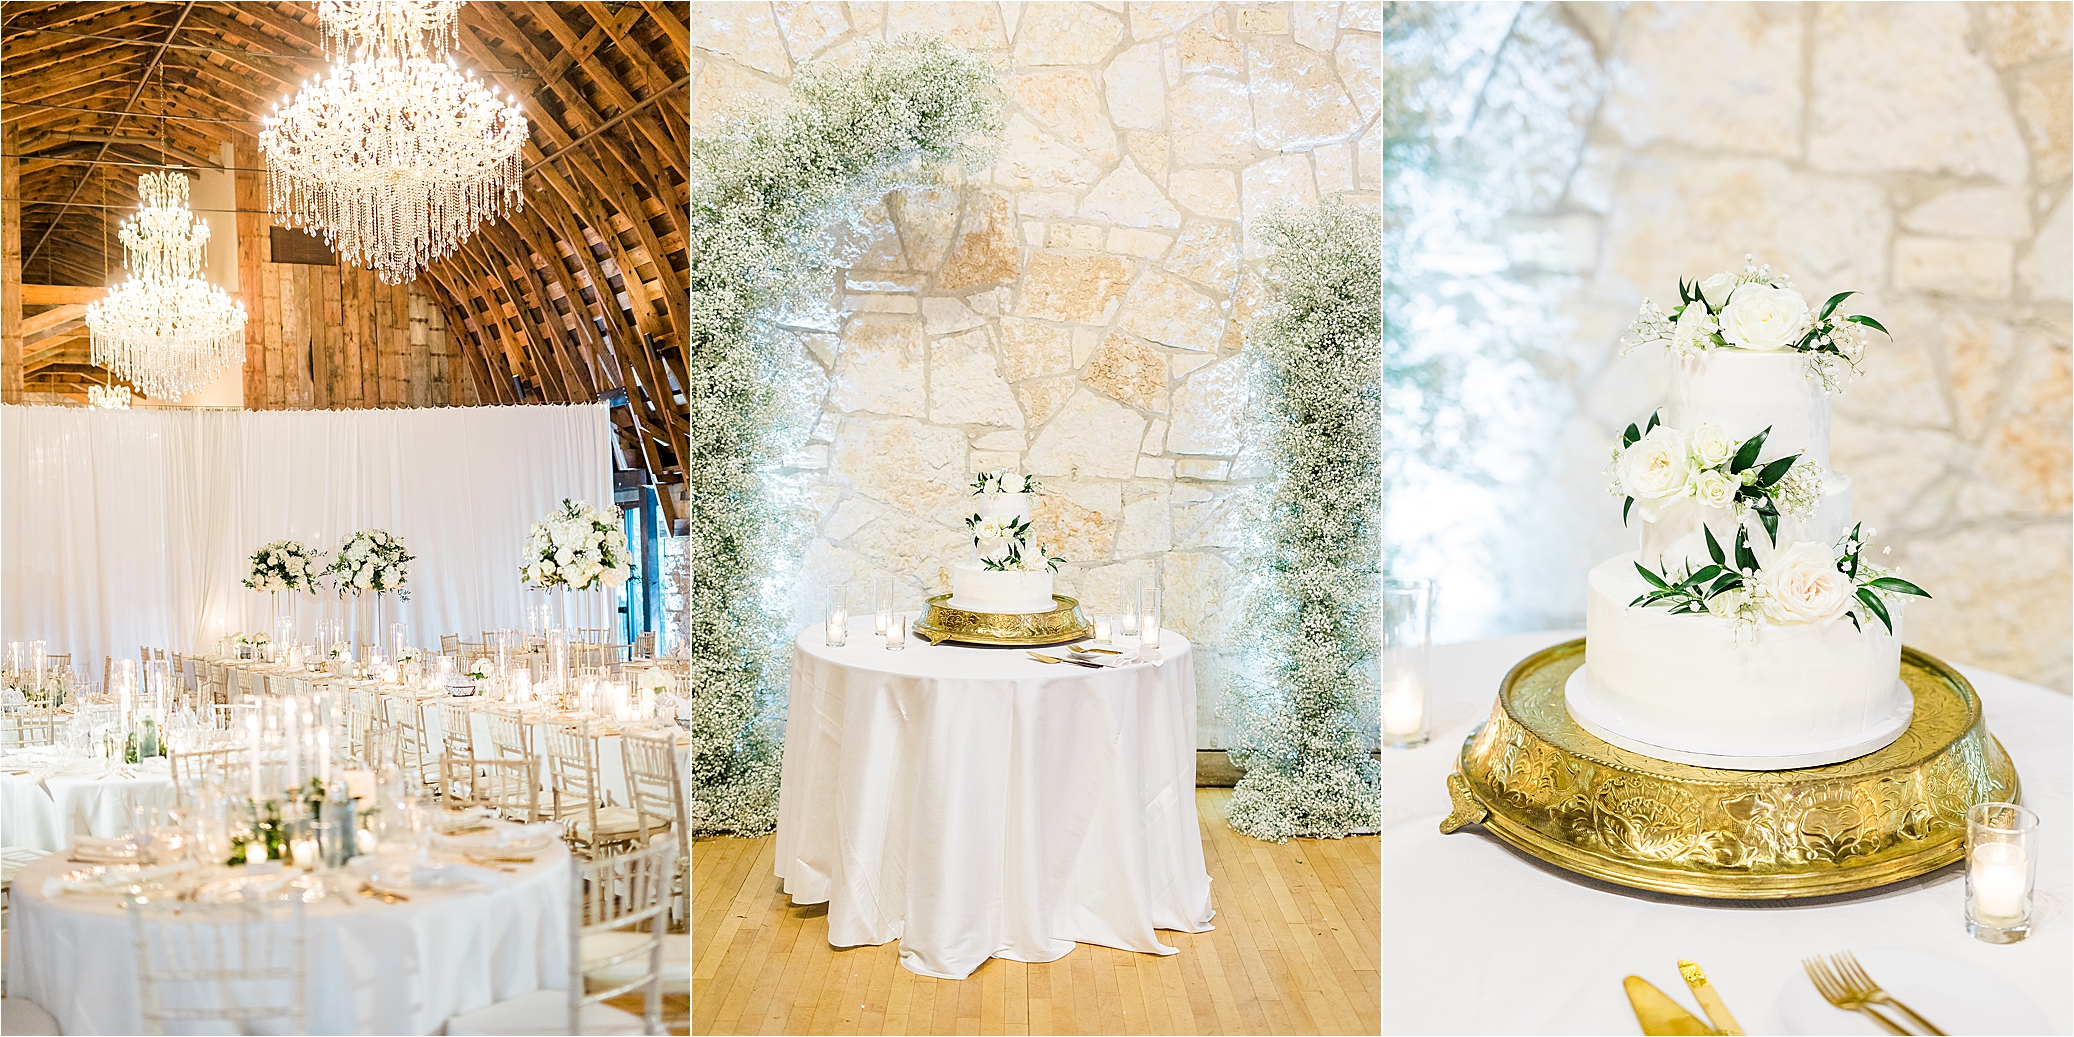 A white three tiered wedding cake adorned with flowers and a baby's breath arch behind it inside the barn at Brodie Homestead in Austin, Texas